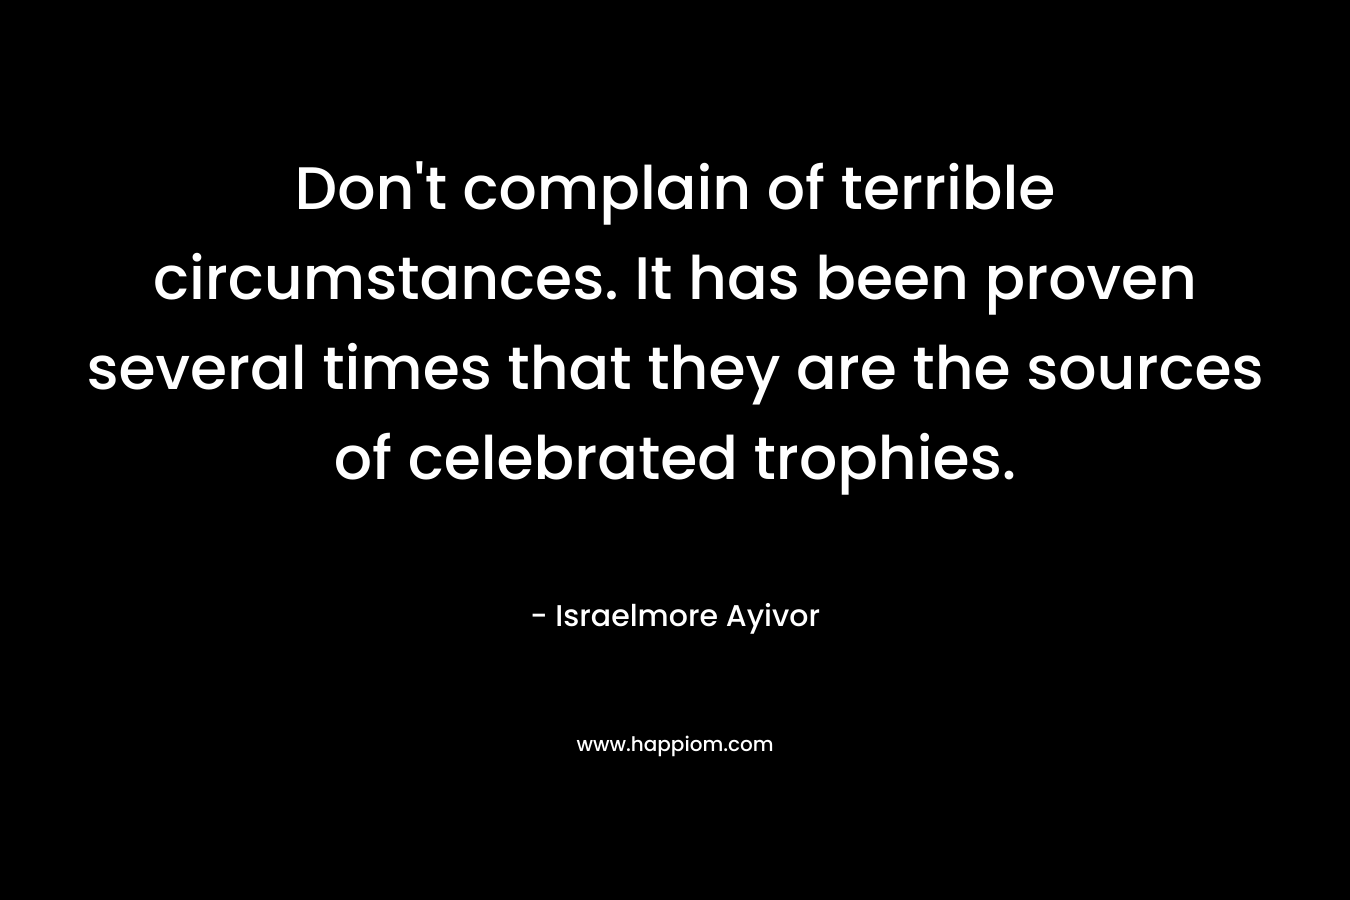 Don't complain of terrible circumstances. It has been proven several times that they are the sources of celebrated trophies.